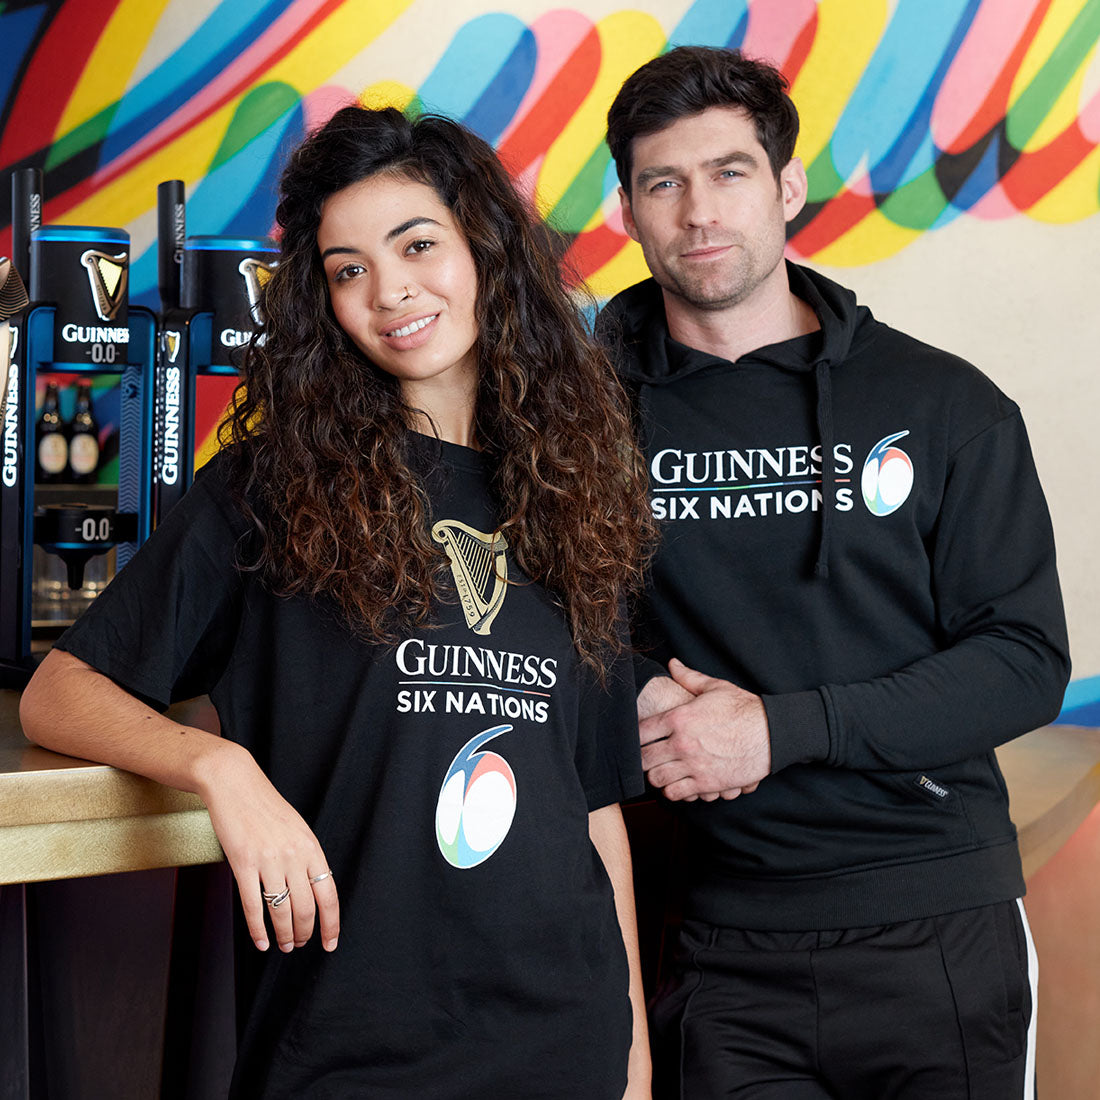 A man and a woman wearing Guinness hoodies stand in front of a colorful promotional backdrop.